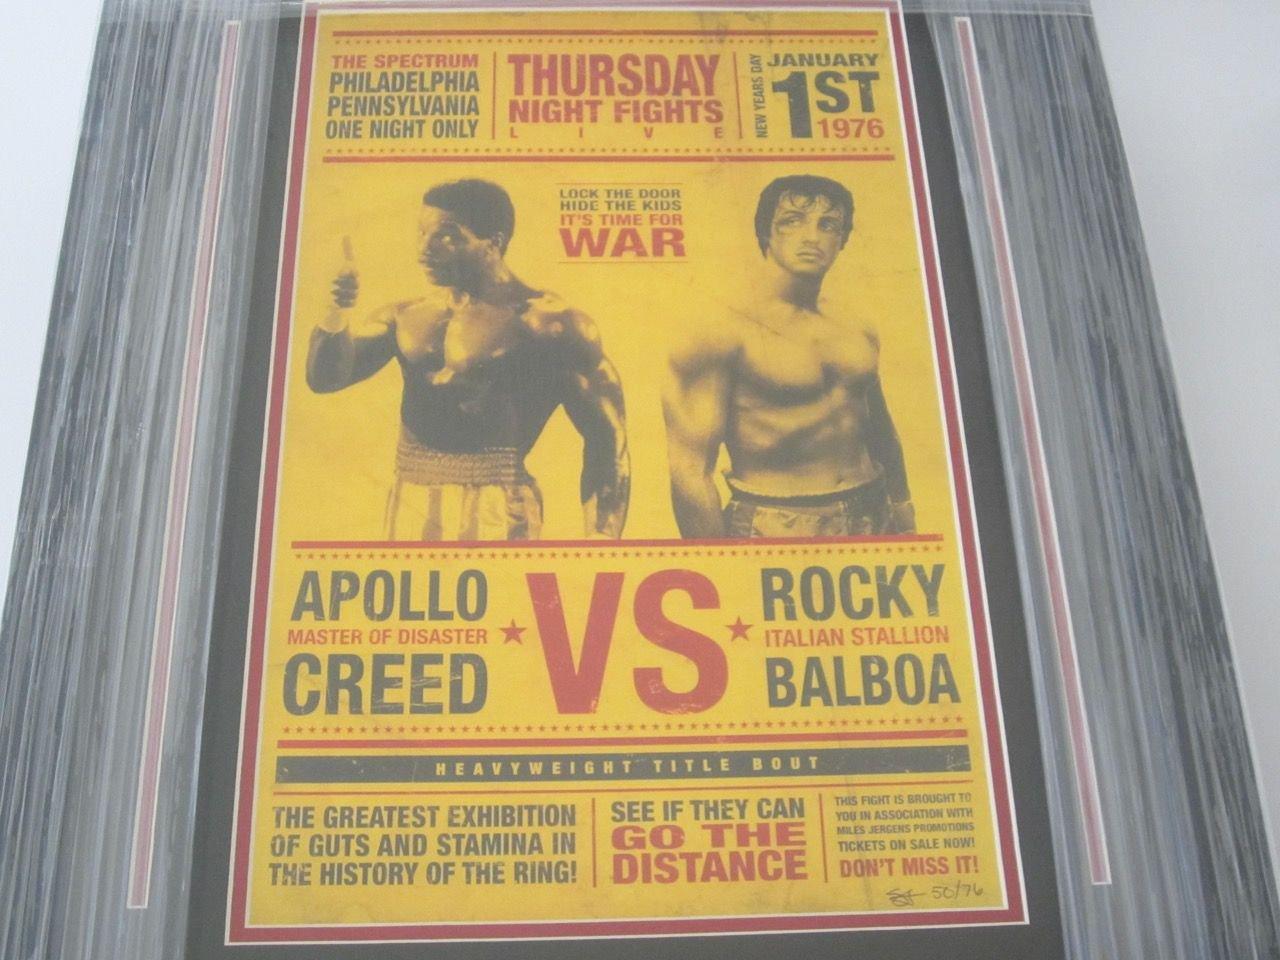 Sylvester Stallone "Rocky" and Carl Weathers "Apollo Creed" Hand Signed Autographed Framed Boxing Gl